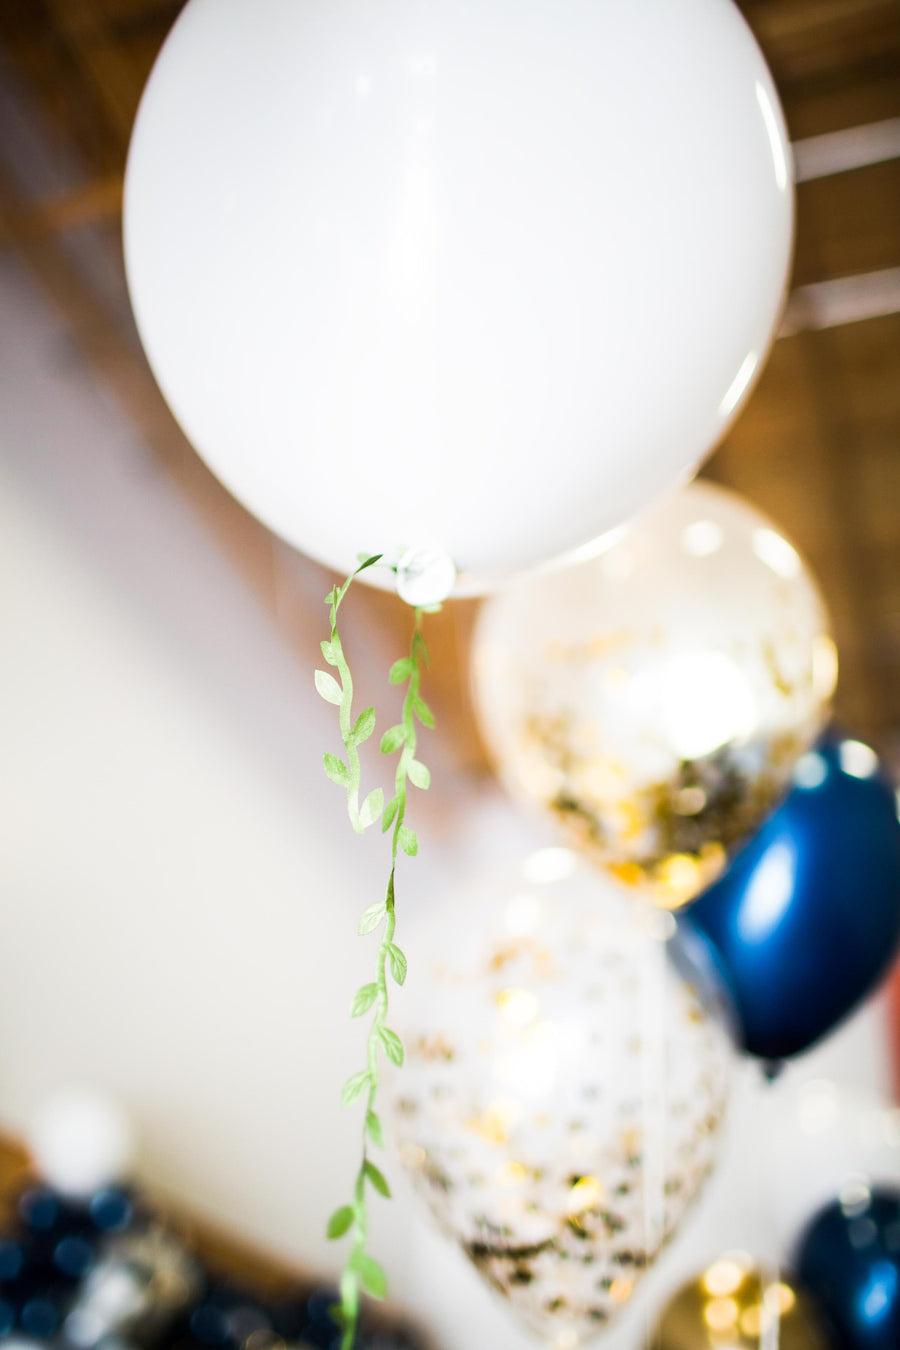 Balloon Greenery - Vine Garland for Floral Balloons